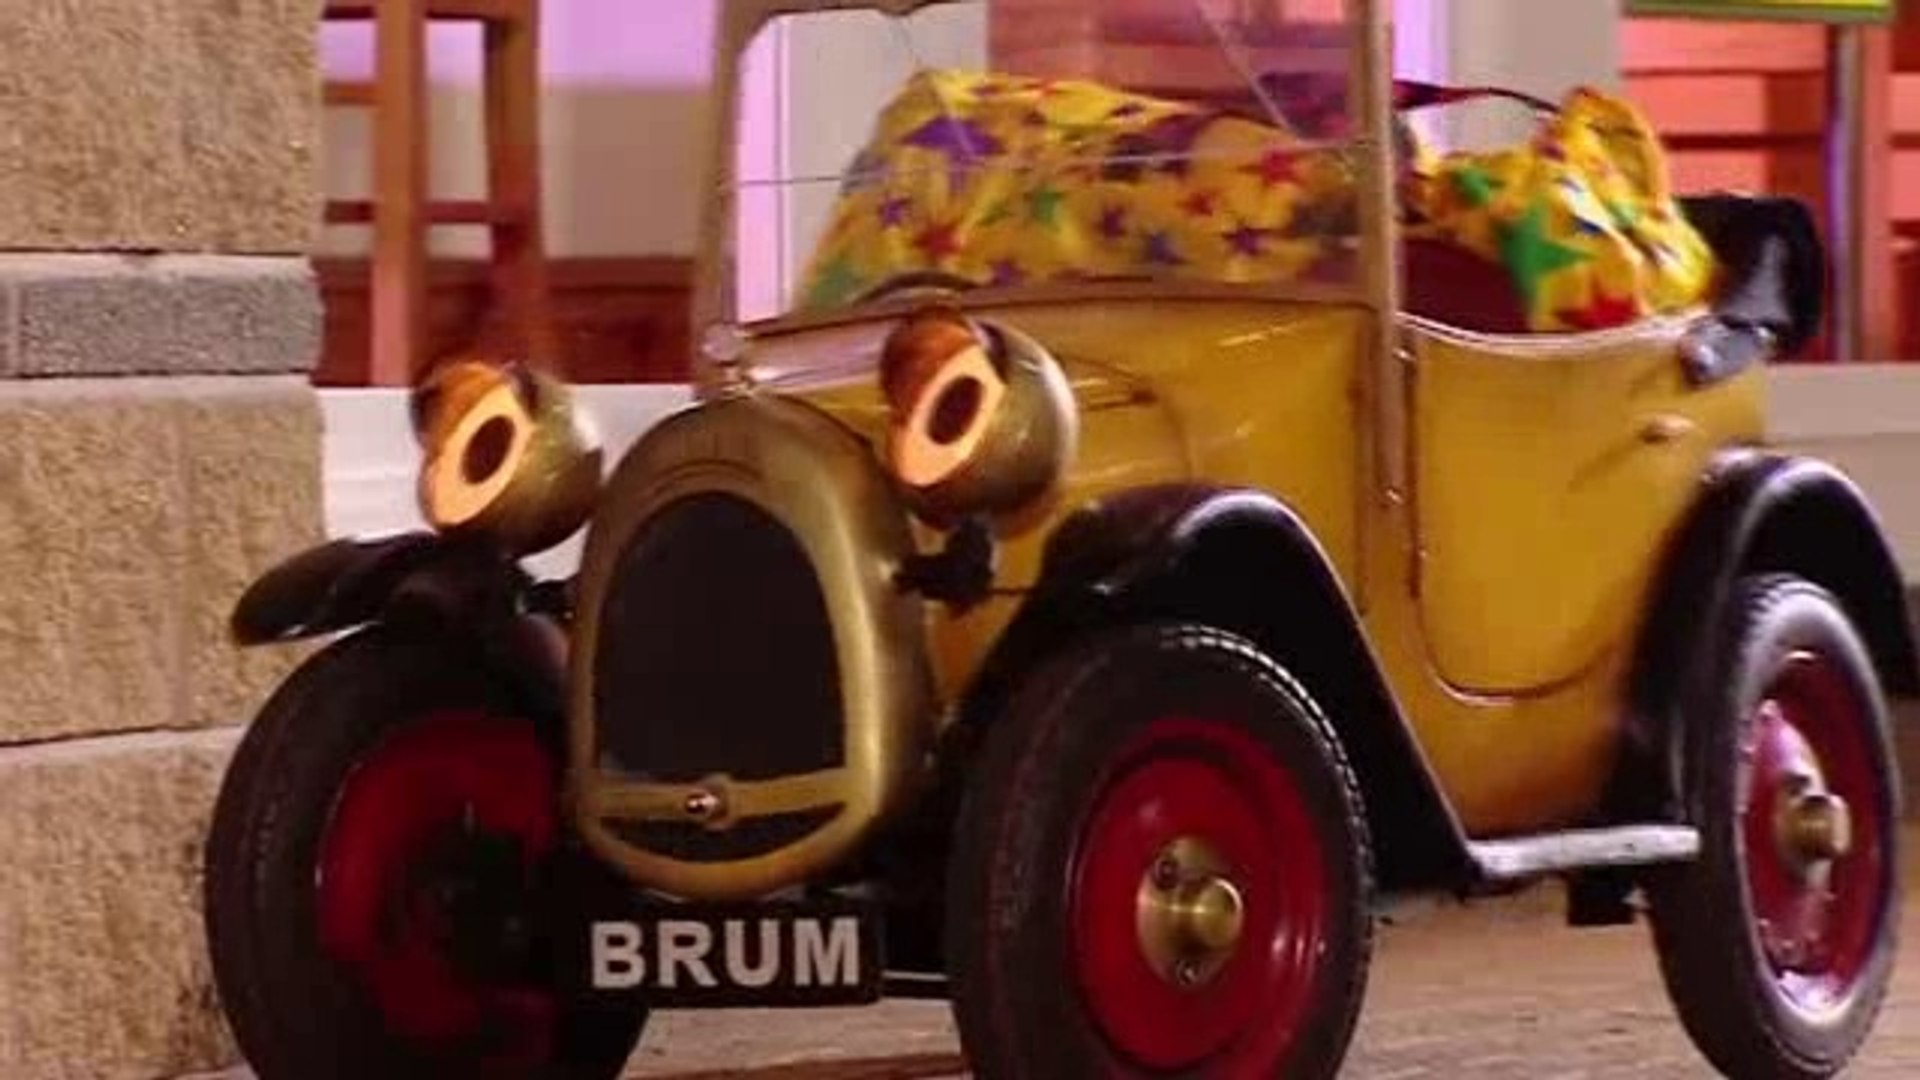 Brum 408 Bowling Alley Kids Show Full Episode Video Dailymotion - i took my girlfriend bowling and she got in a fight roblox escape the bowling alley obby dailymotion video